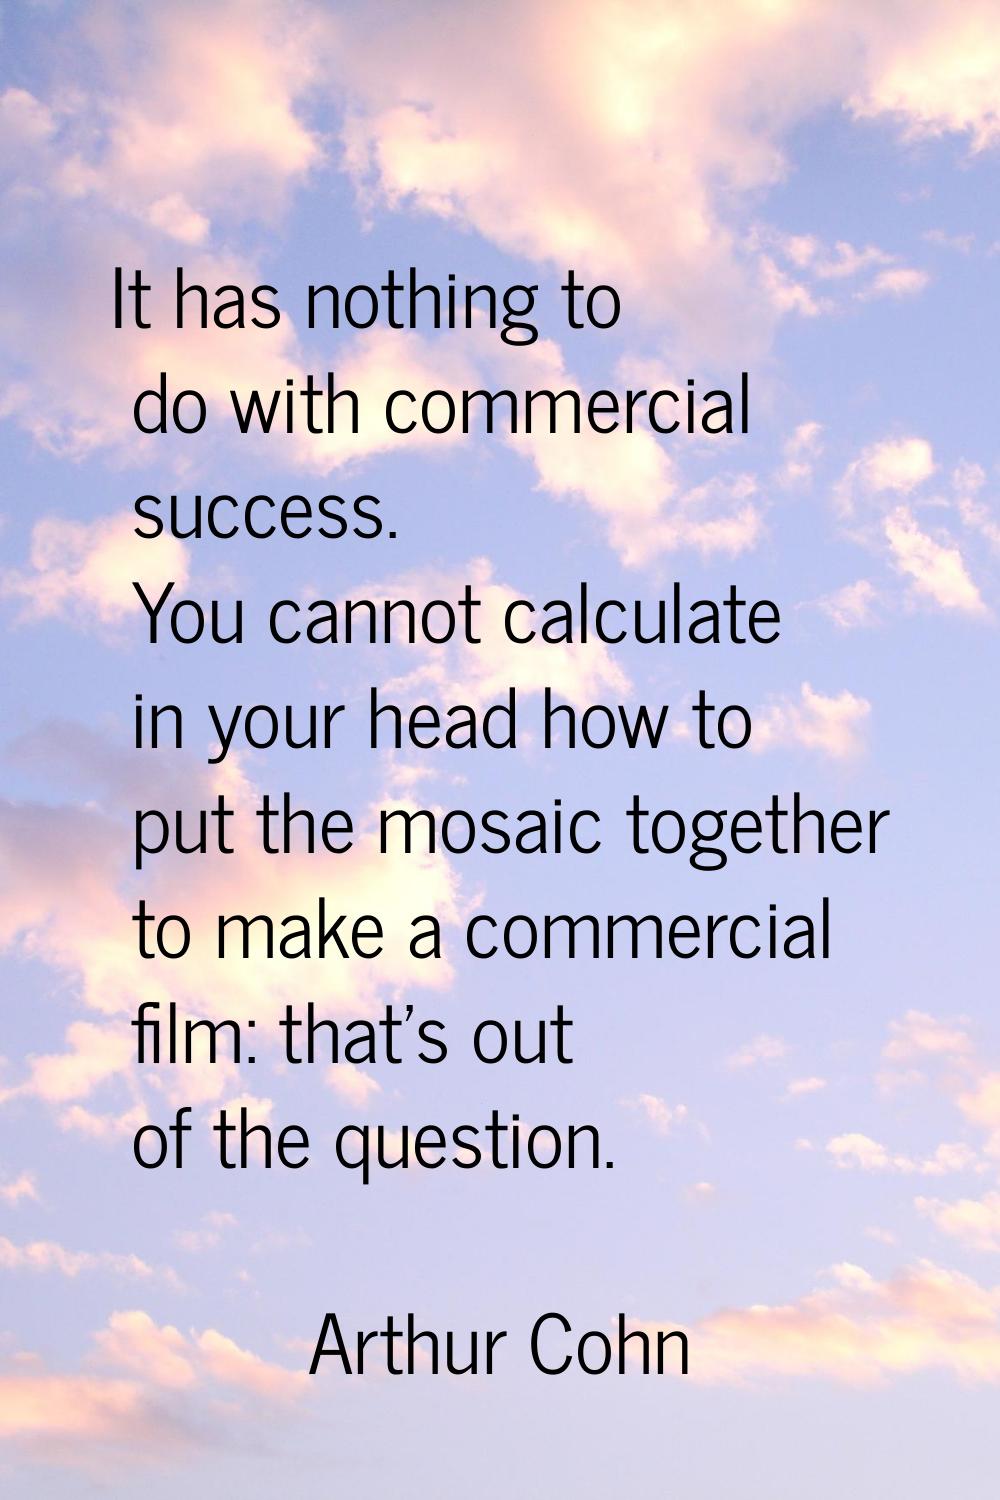 It has nothing to do with commercial success. You cannot calculate in your head how to put the mosa